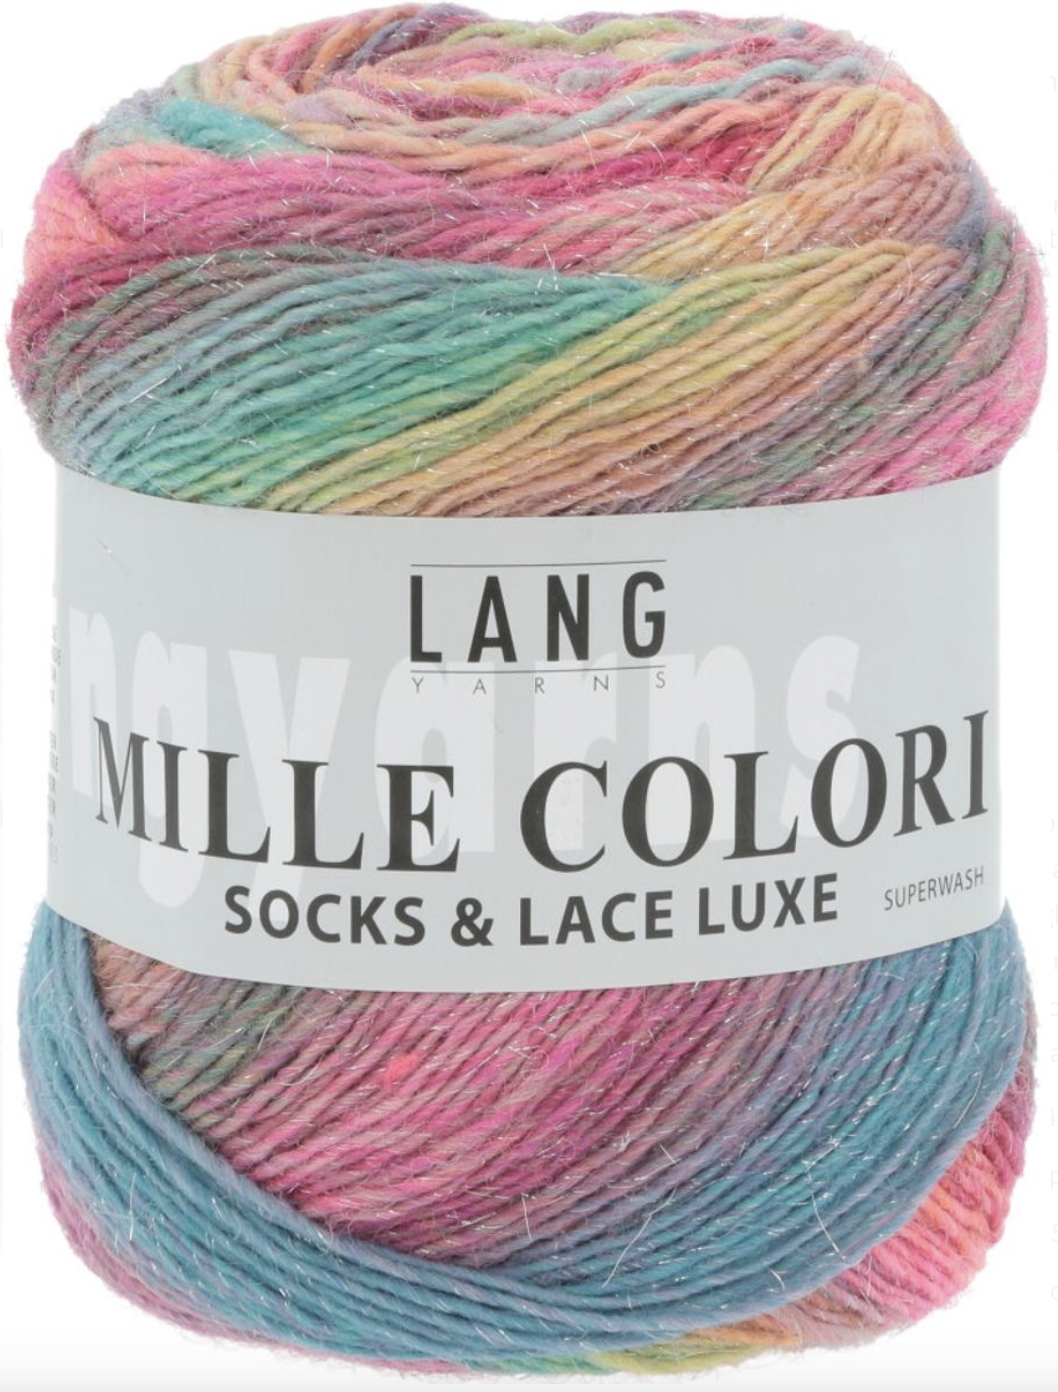 Mille Colori socks and lace luxe